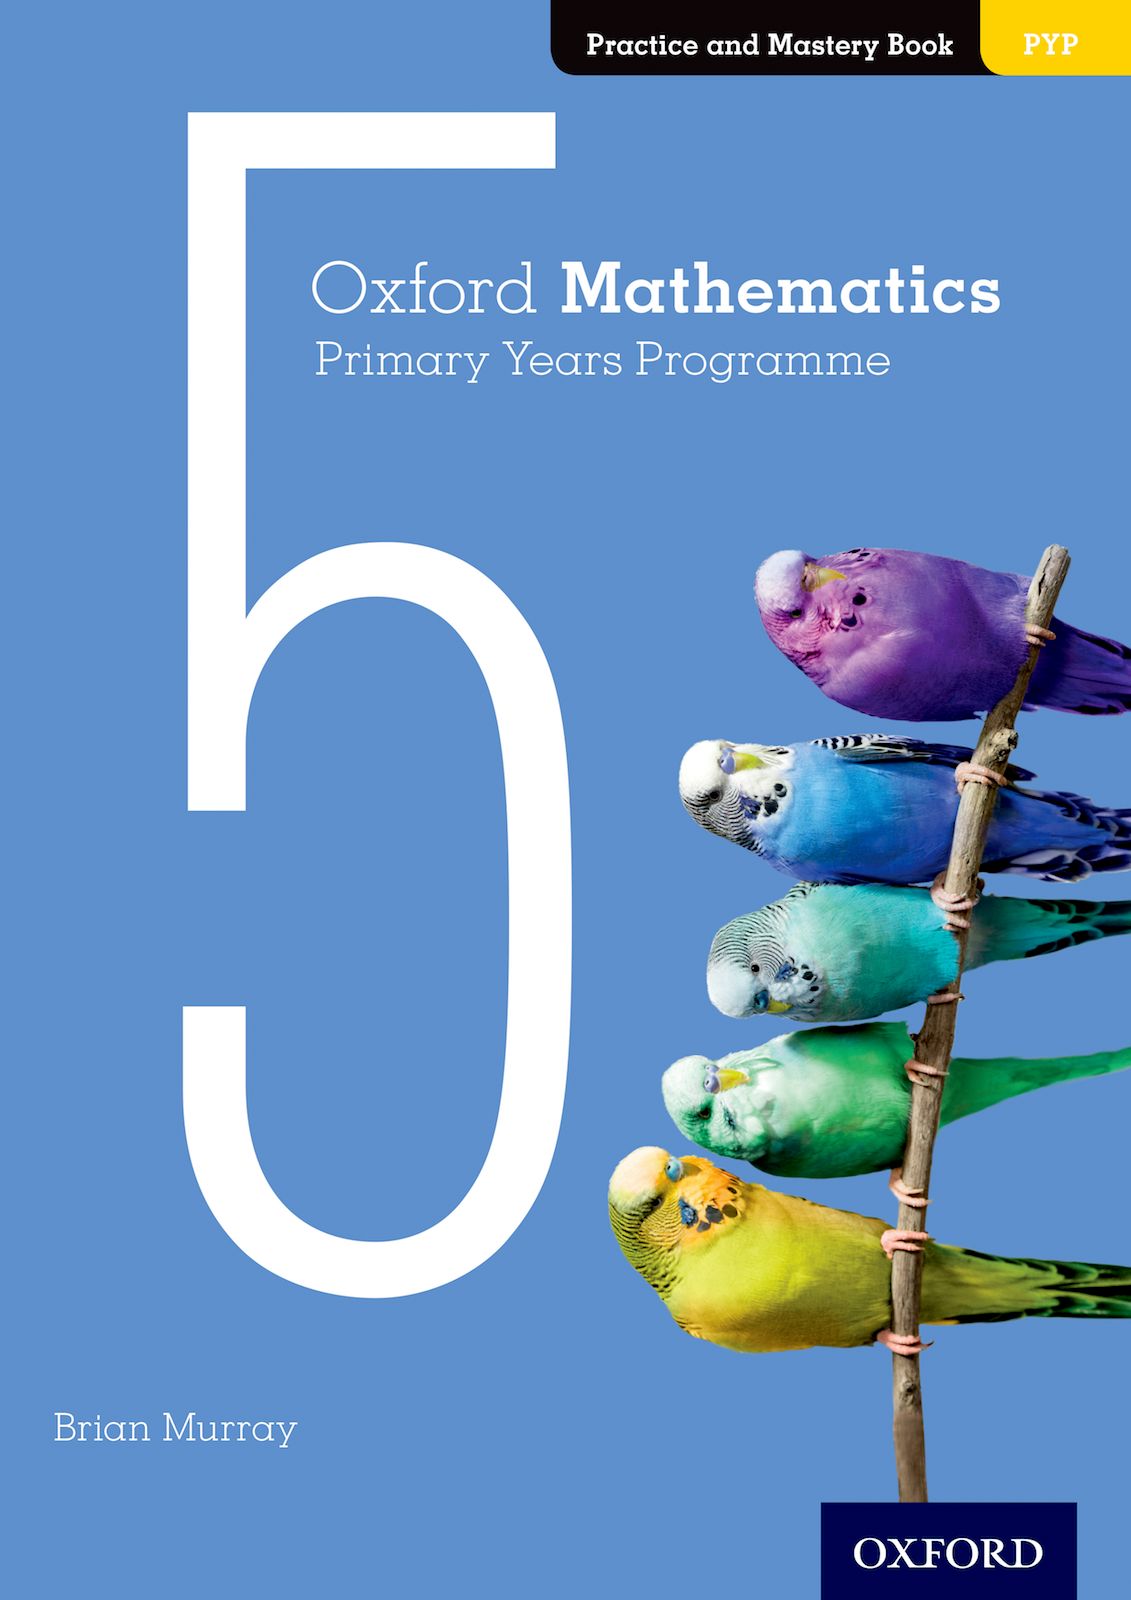 Featured image for “Oxford Mathematics Primary Years Programme Practice and Mastery Book 5”